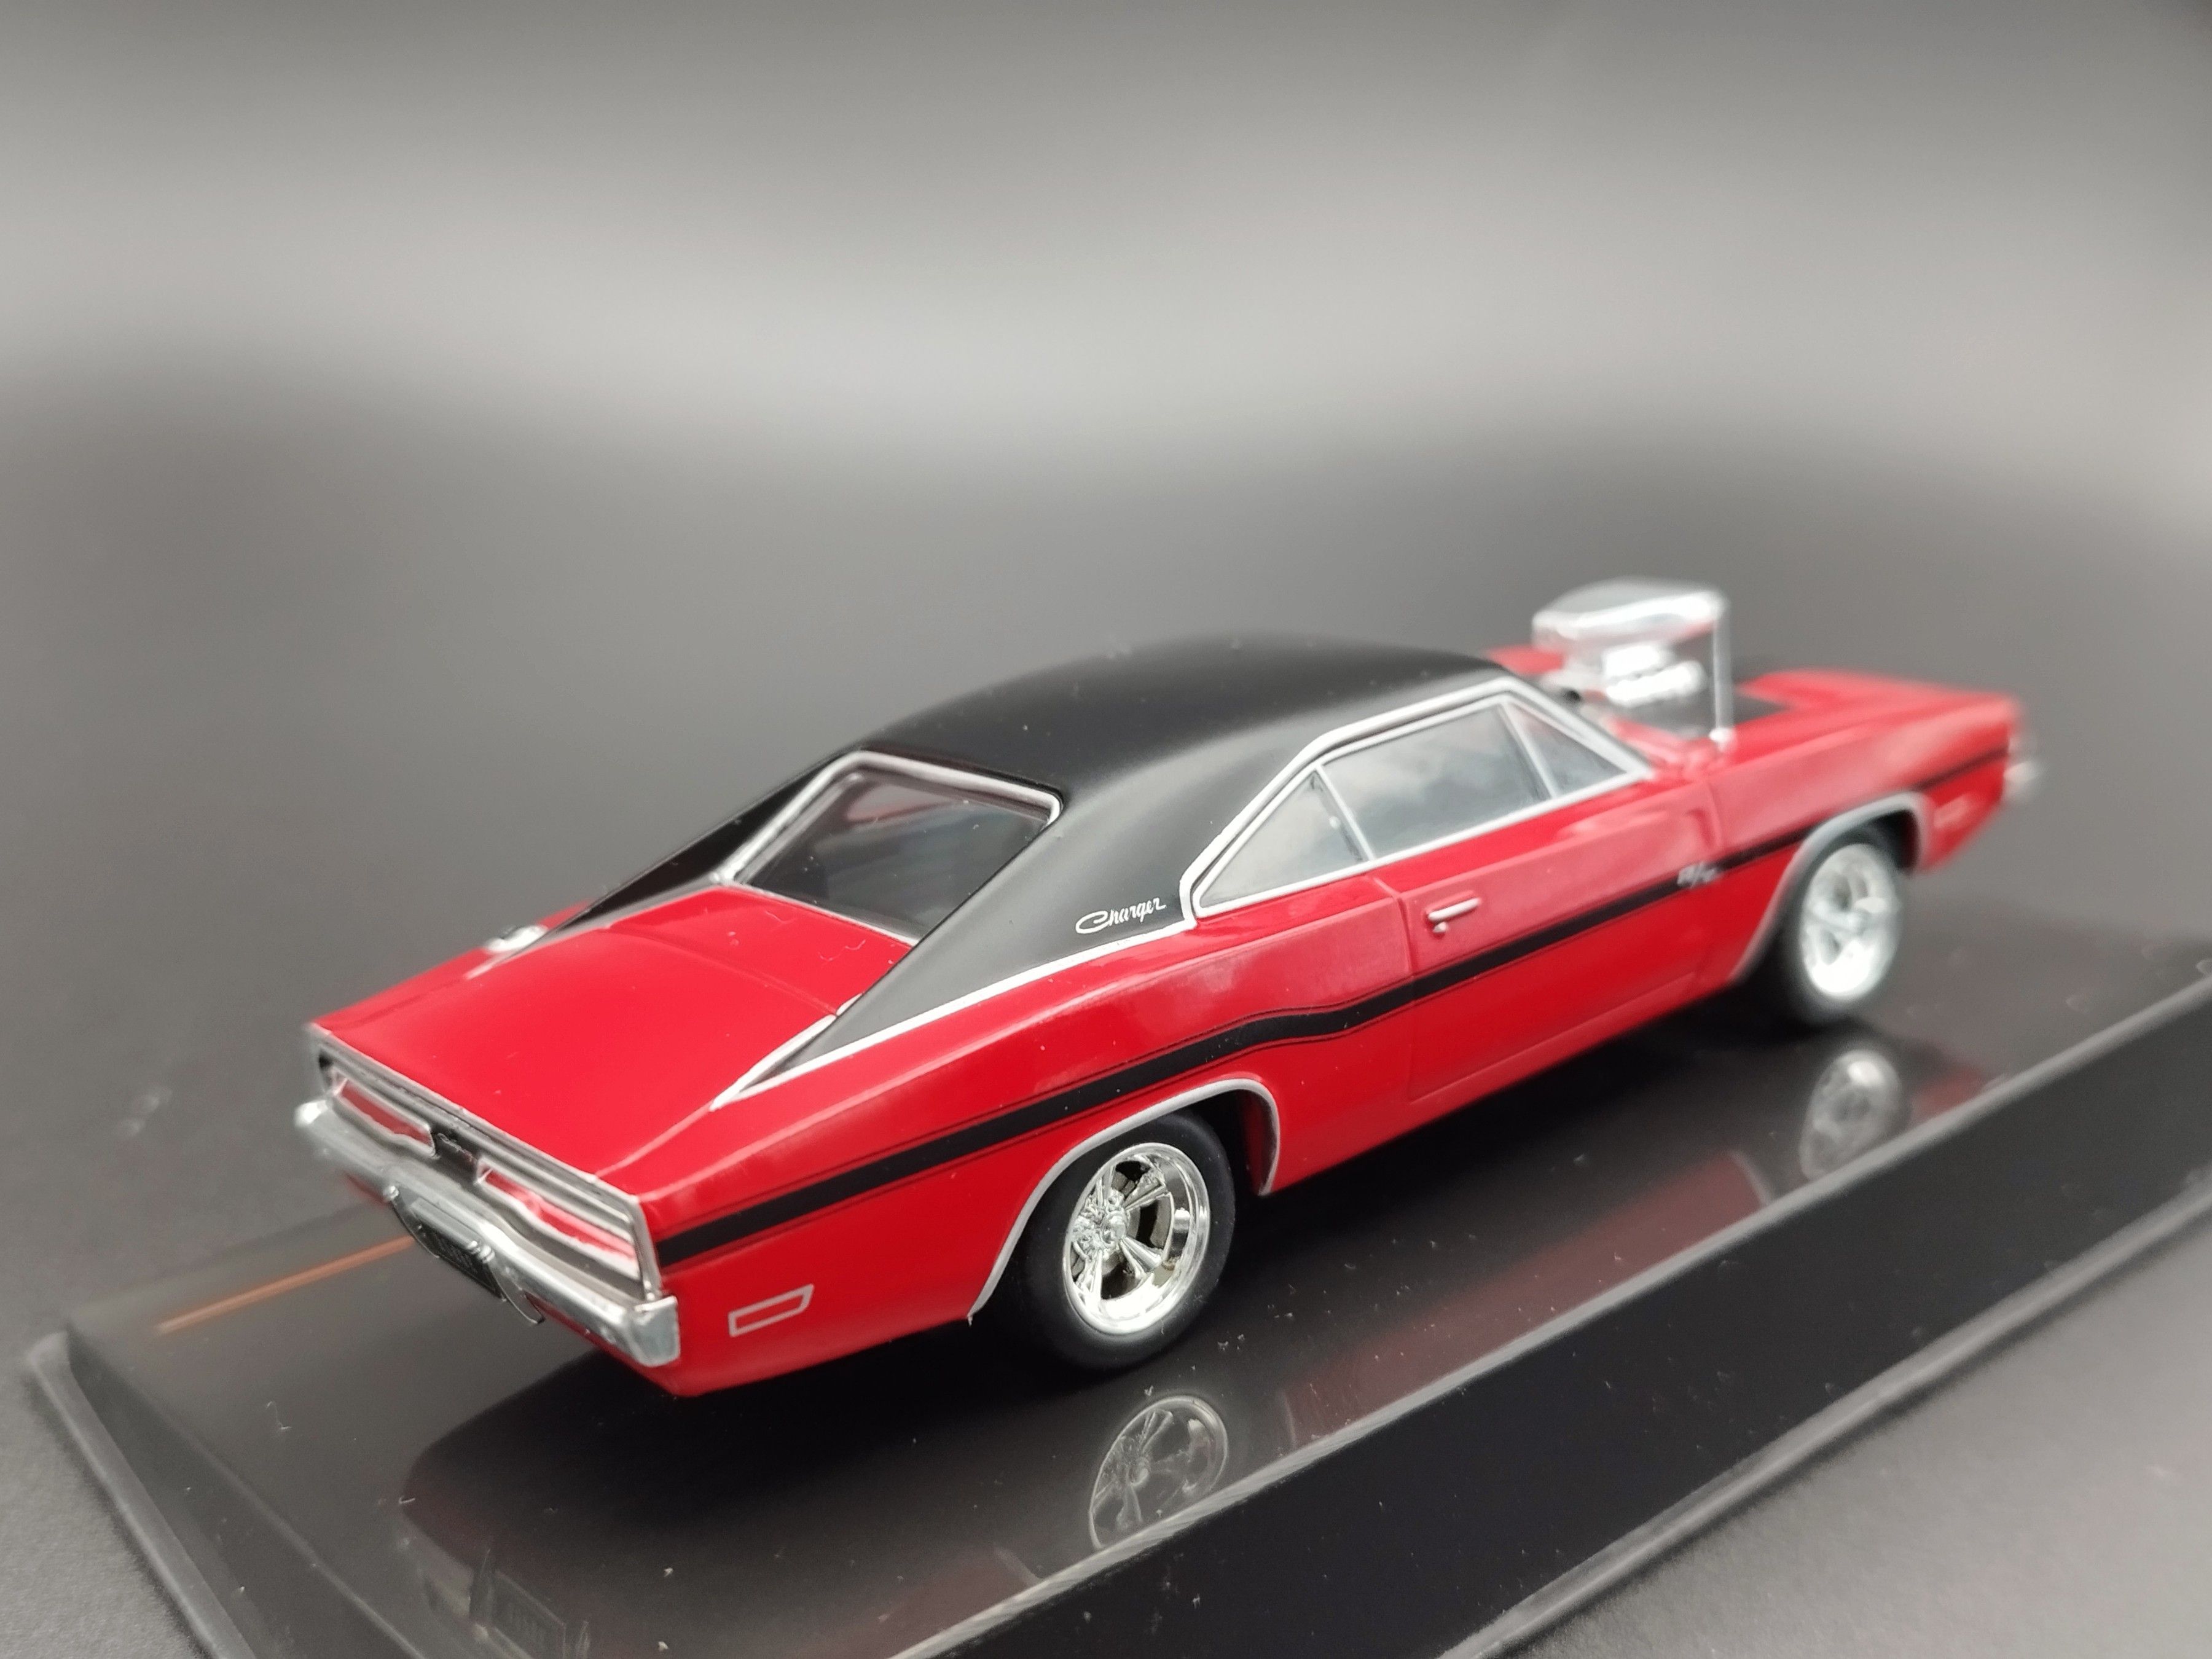 1:43 IXO 1970 Dodge Charger R/T Model nowy